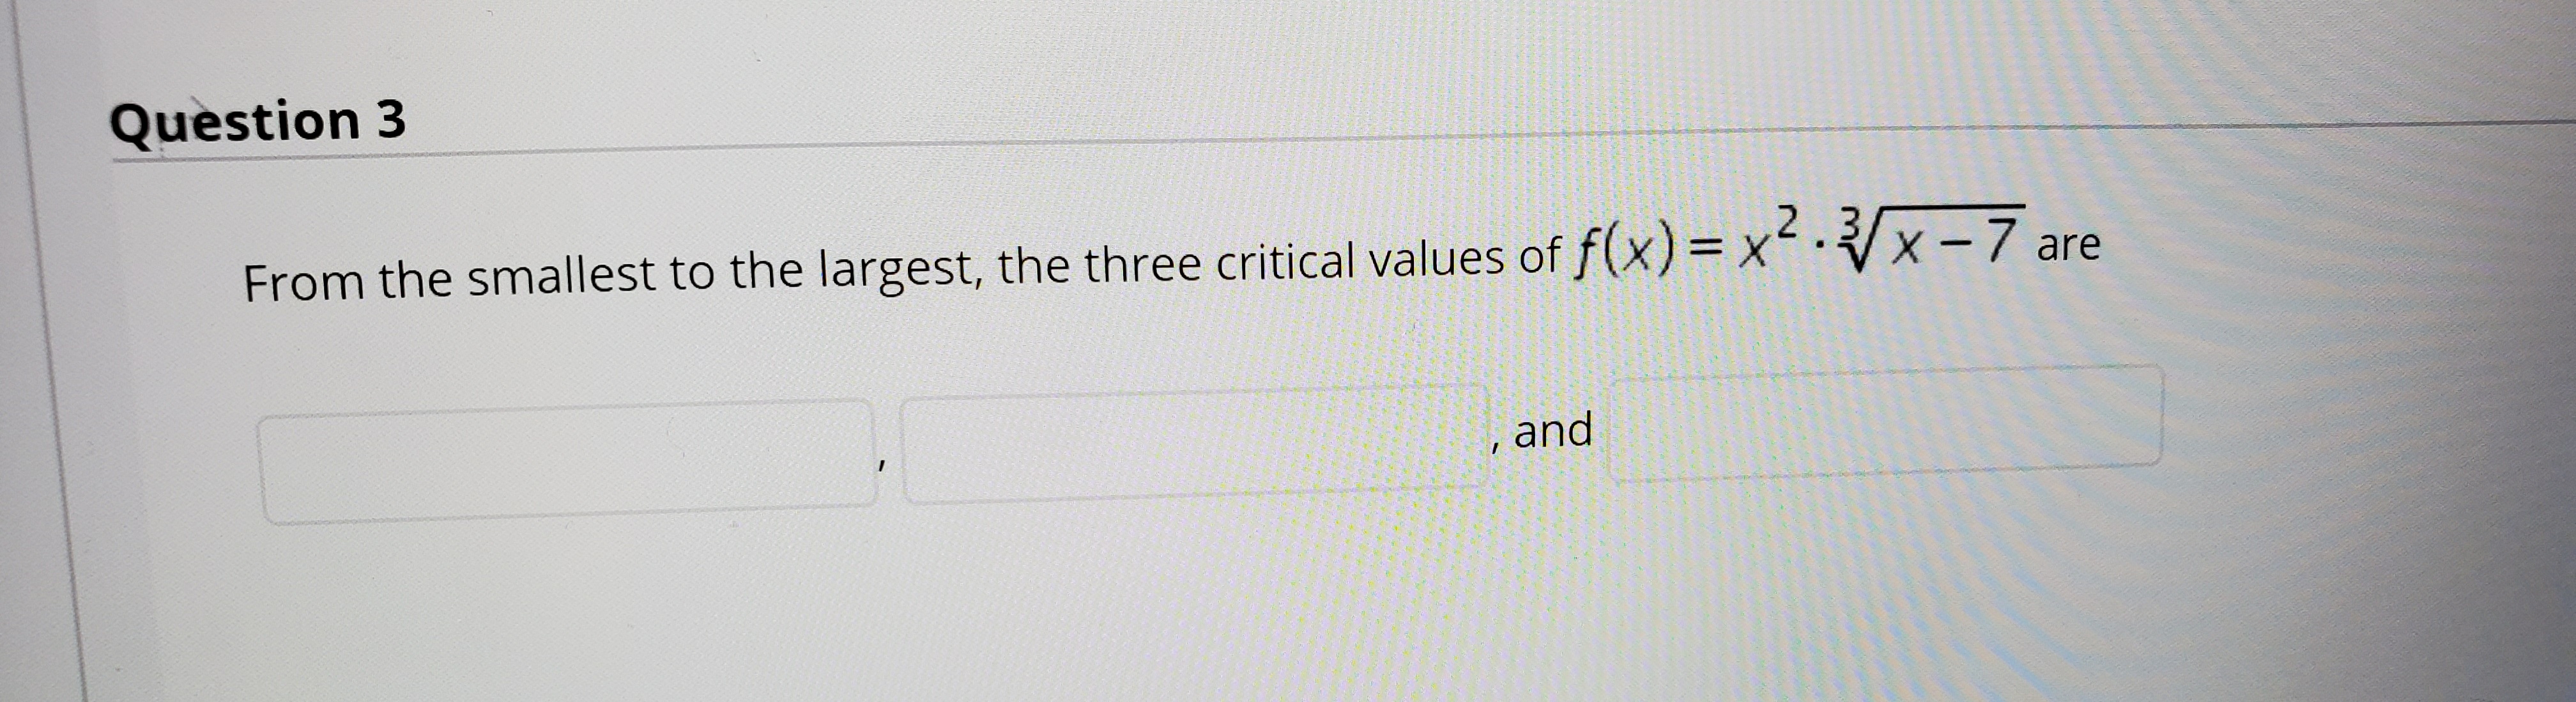 2.3
From the smallest to the largest, the three critical values of f(x) = x x-7 are
